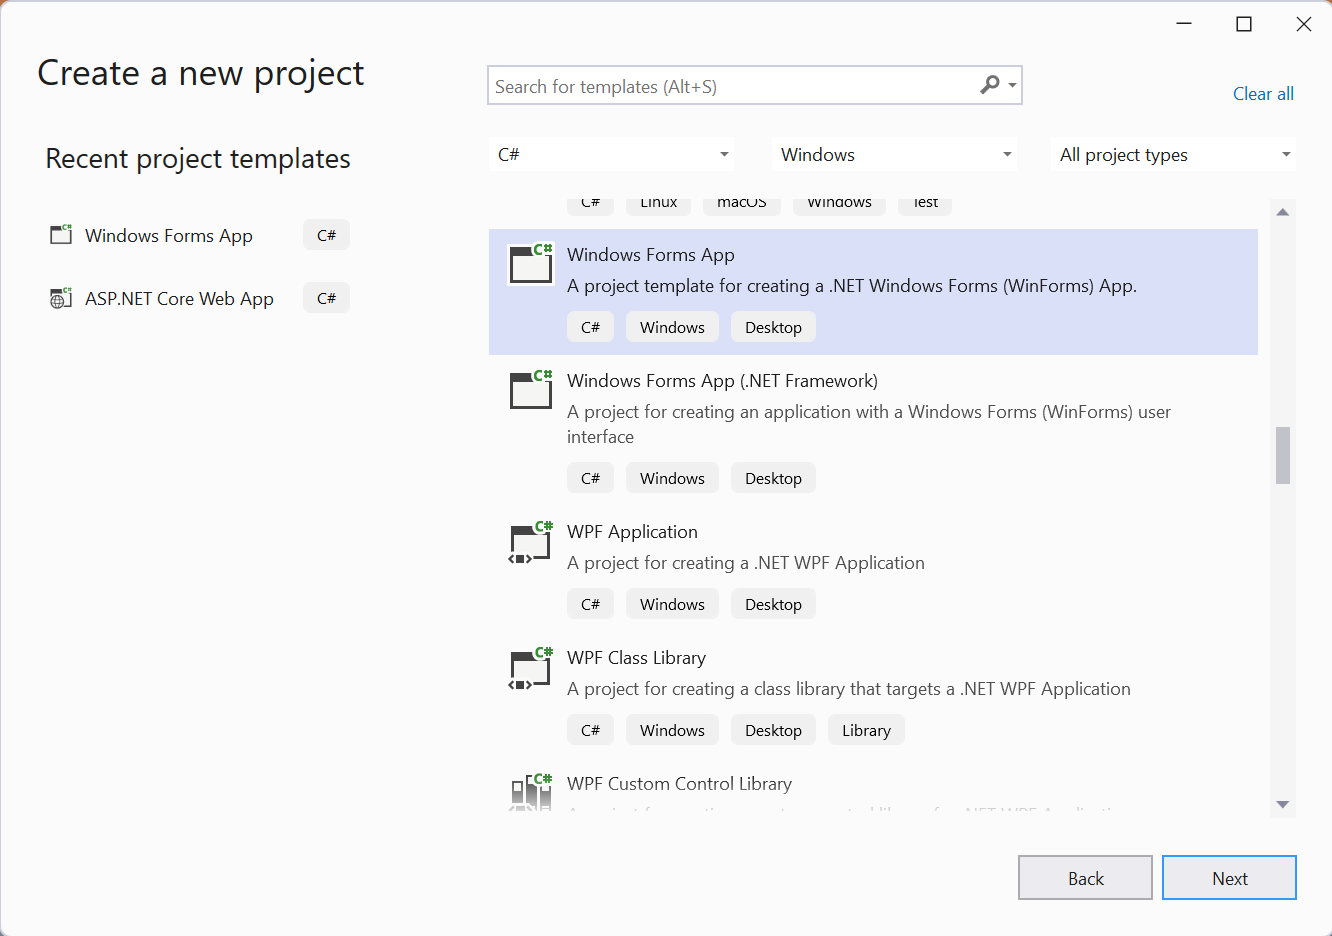 Create a new Windows Forms project